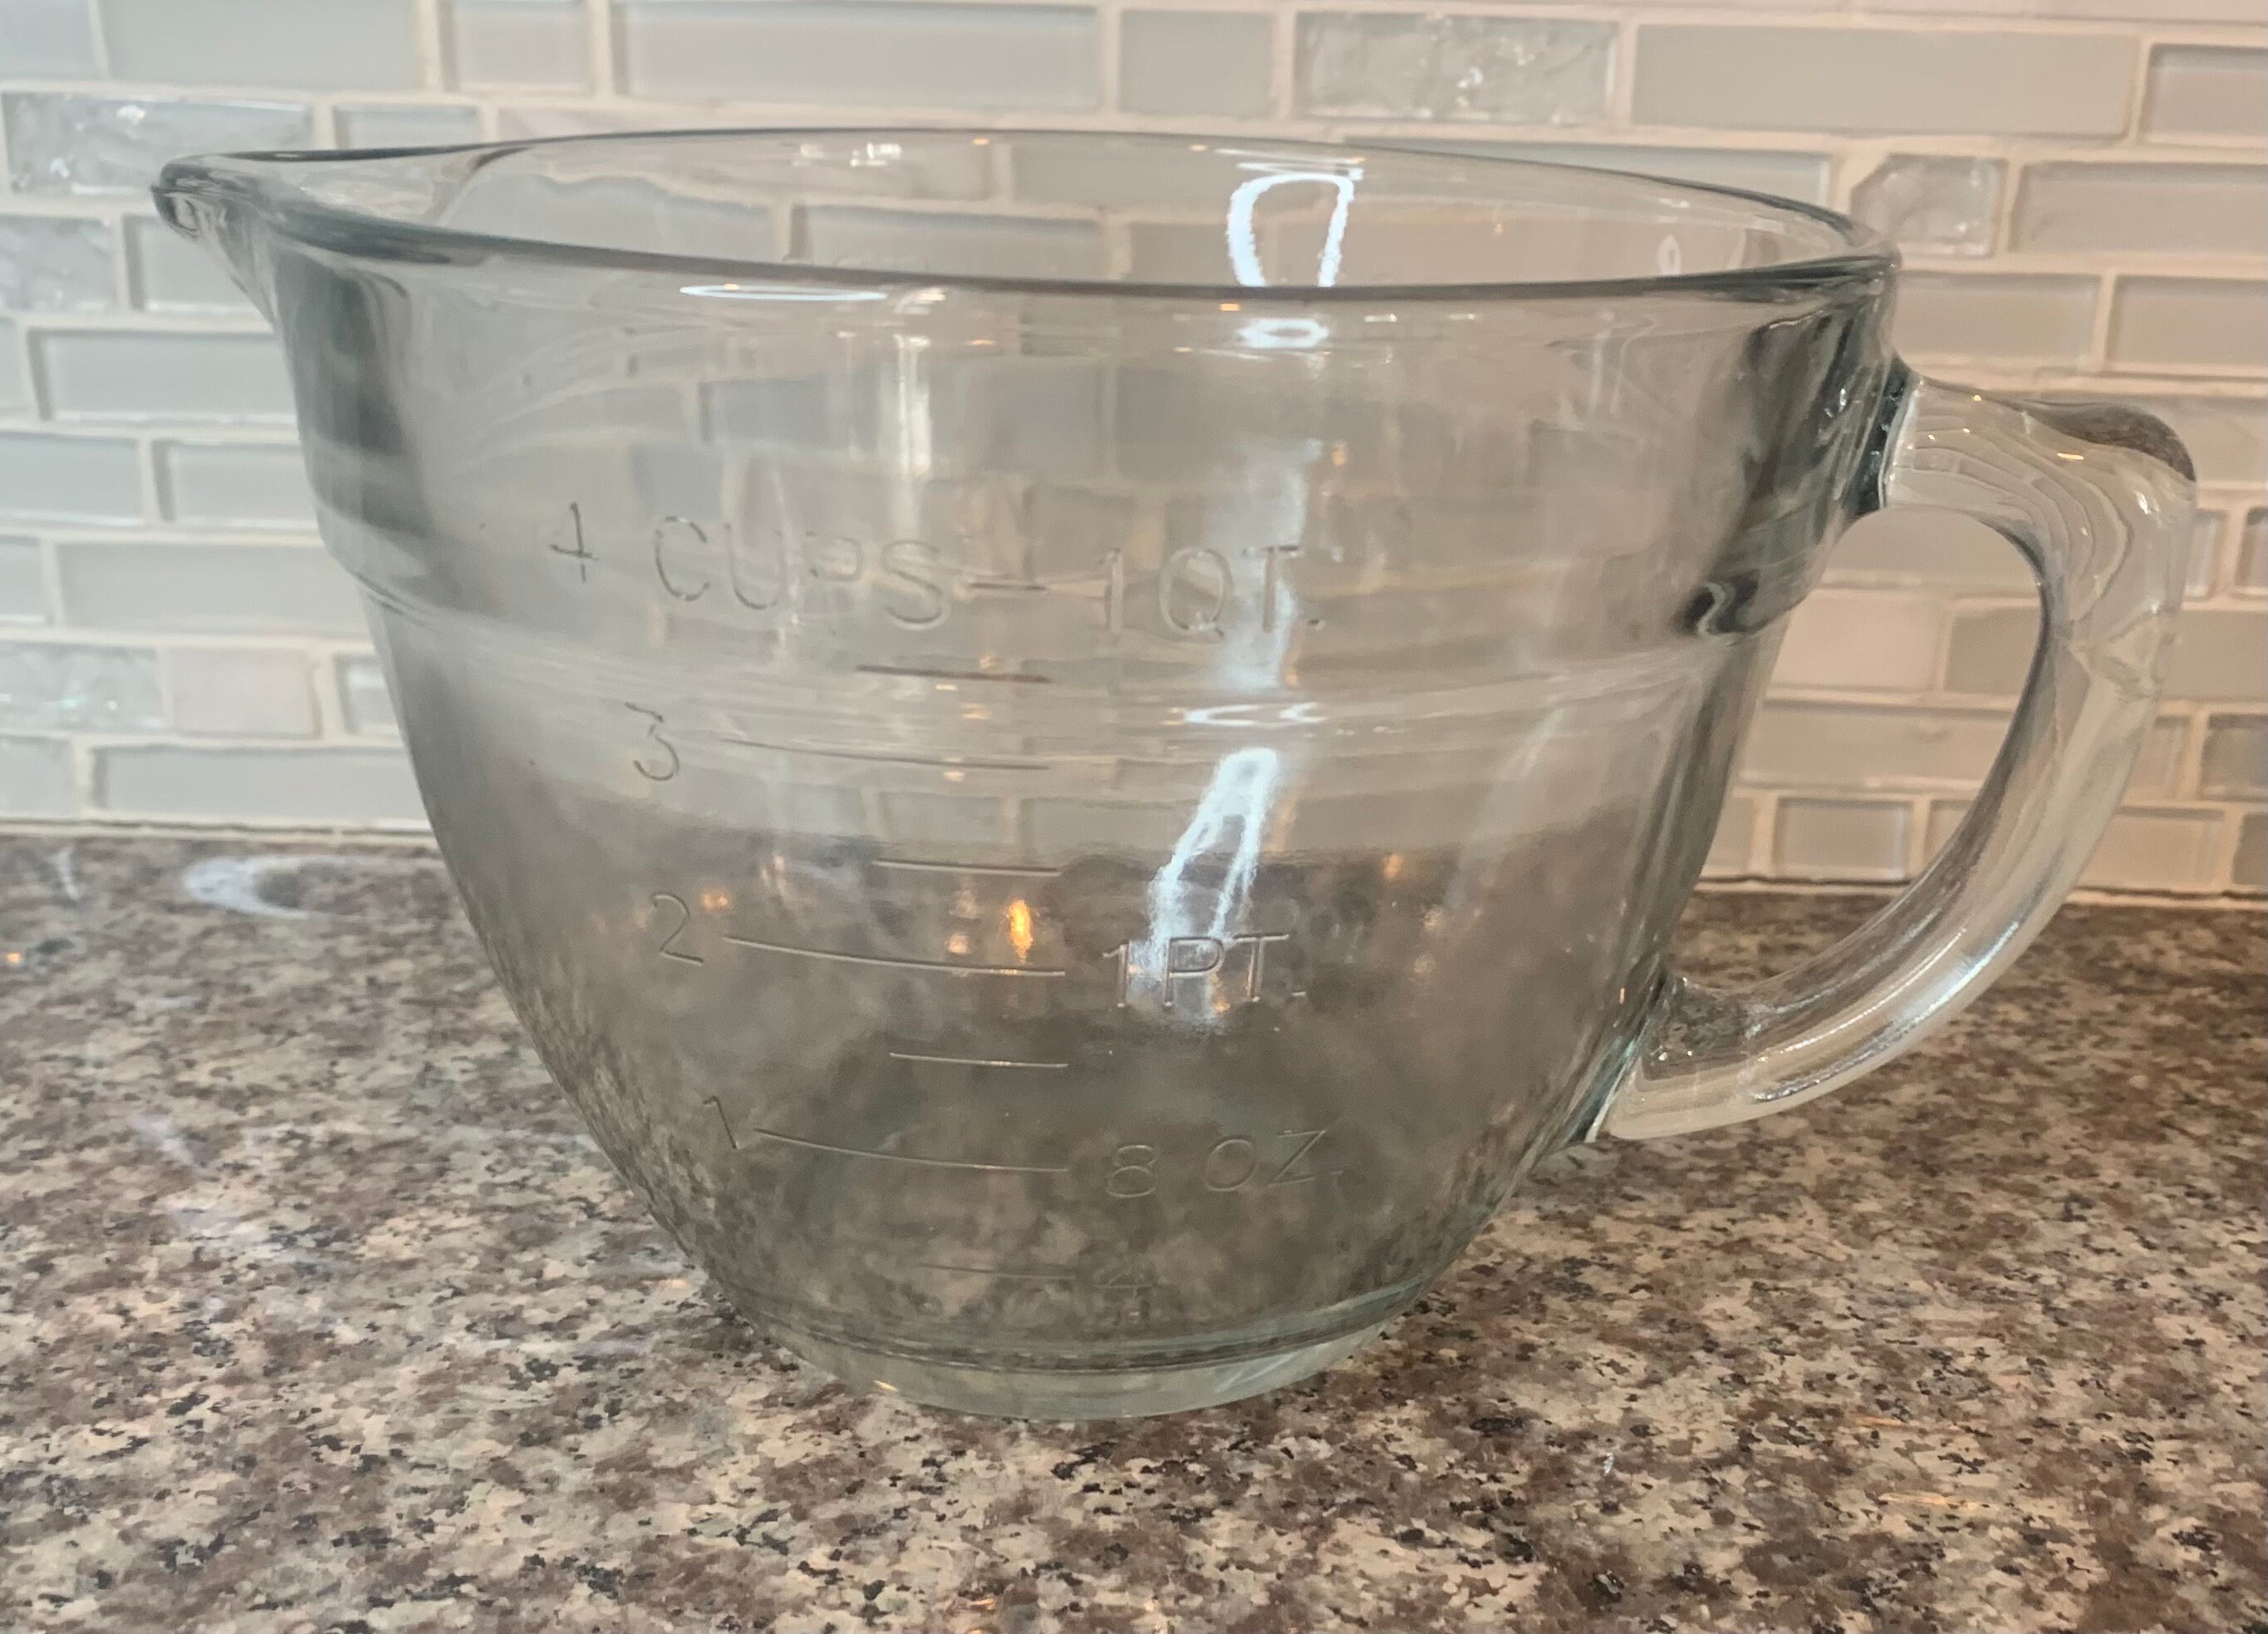 Pampered Chef “Measure All” Slide Measuring Cup Liquid/ Dry Solid Holds 2  Cups